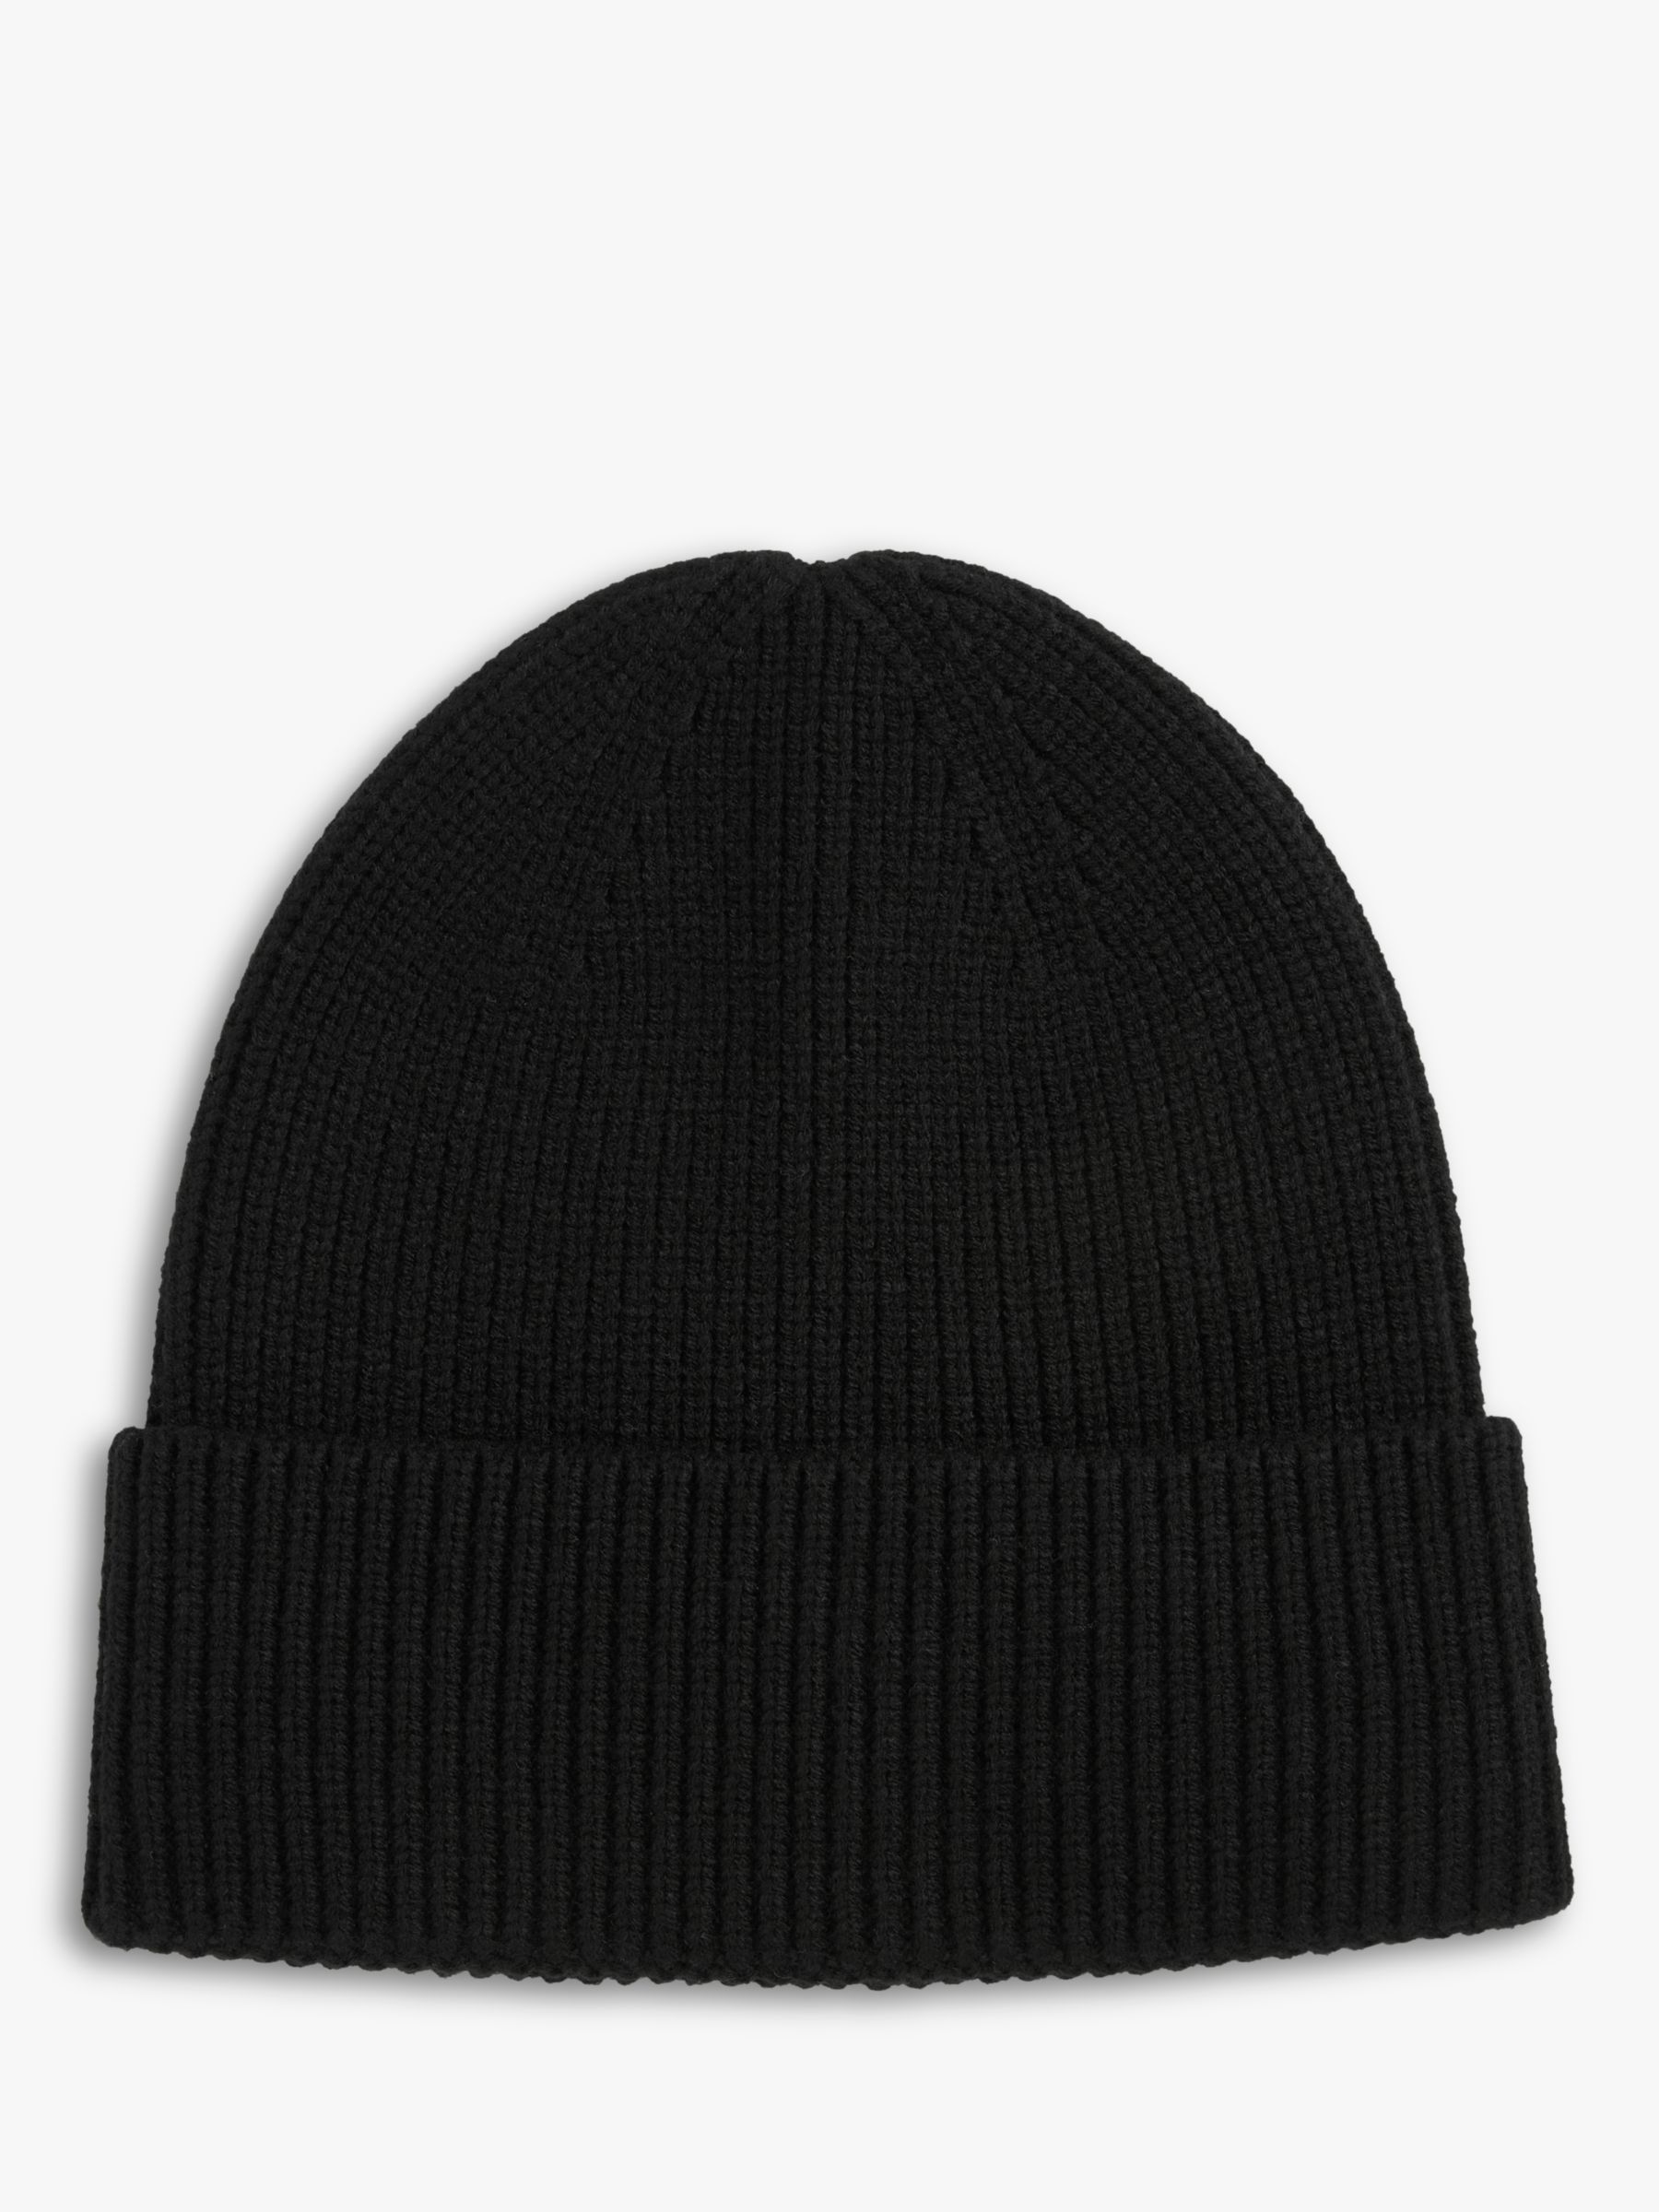 John Lewis ANYDAY Knitted Beanie, Black